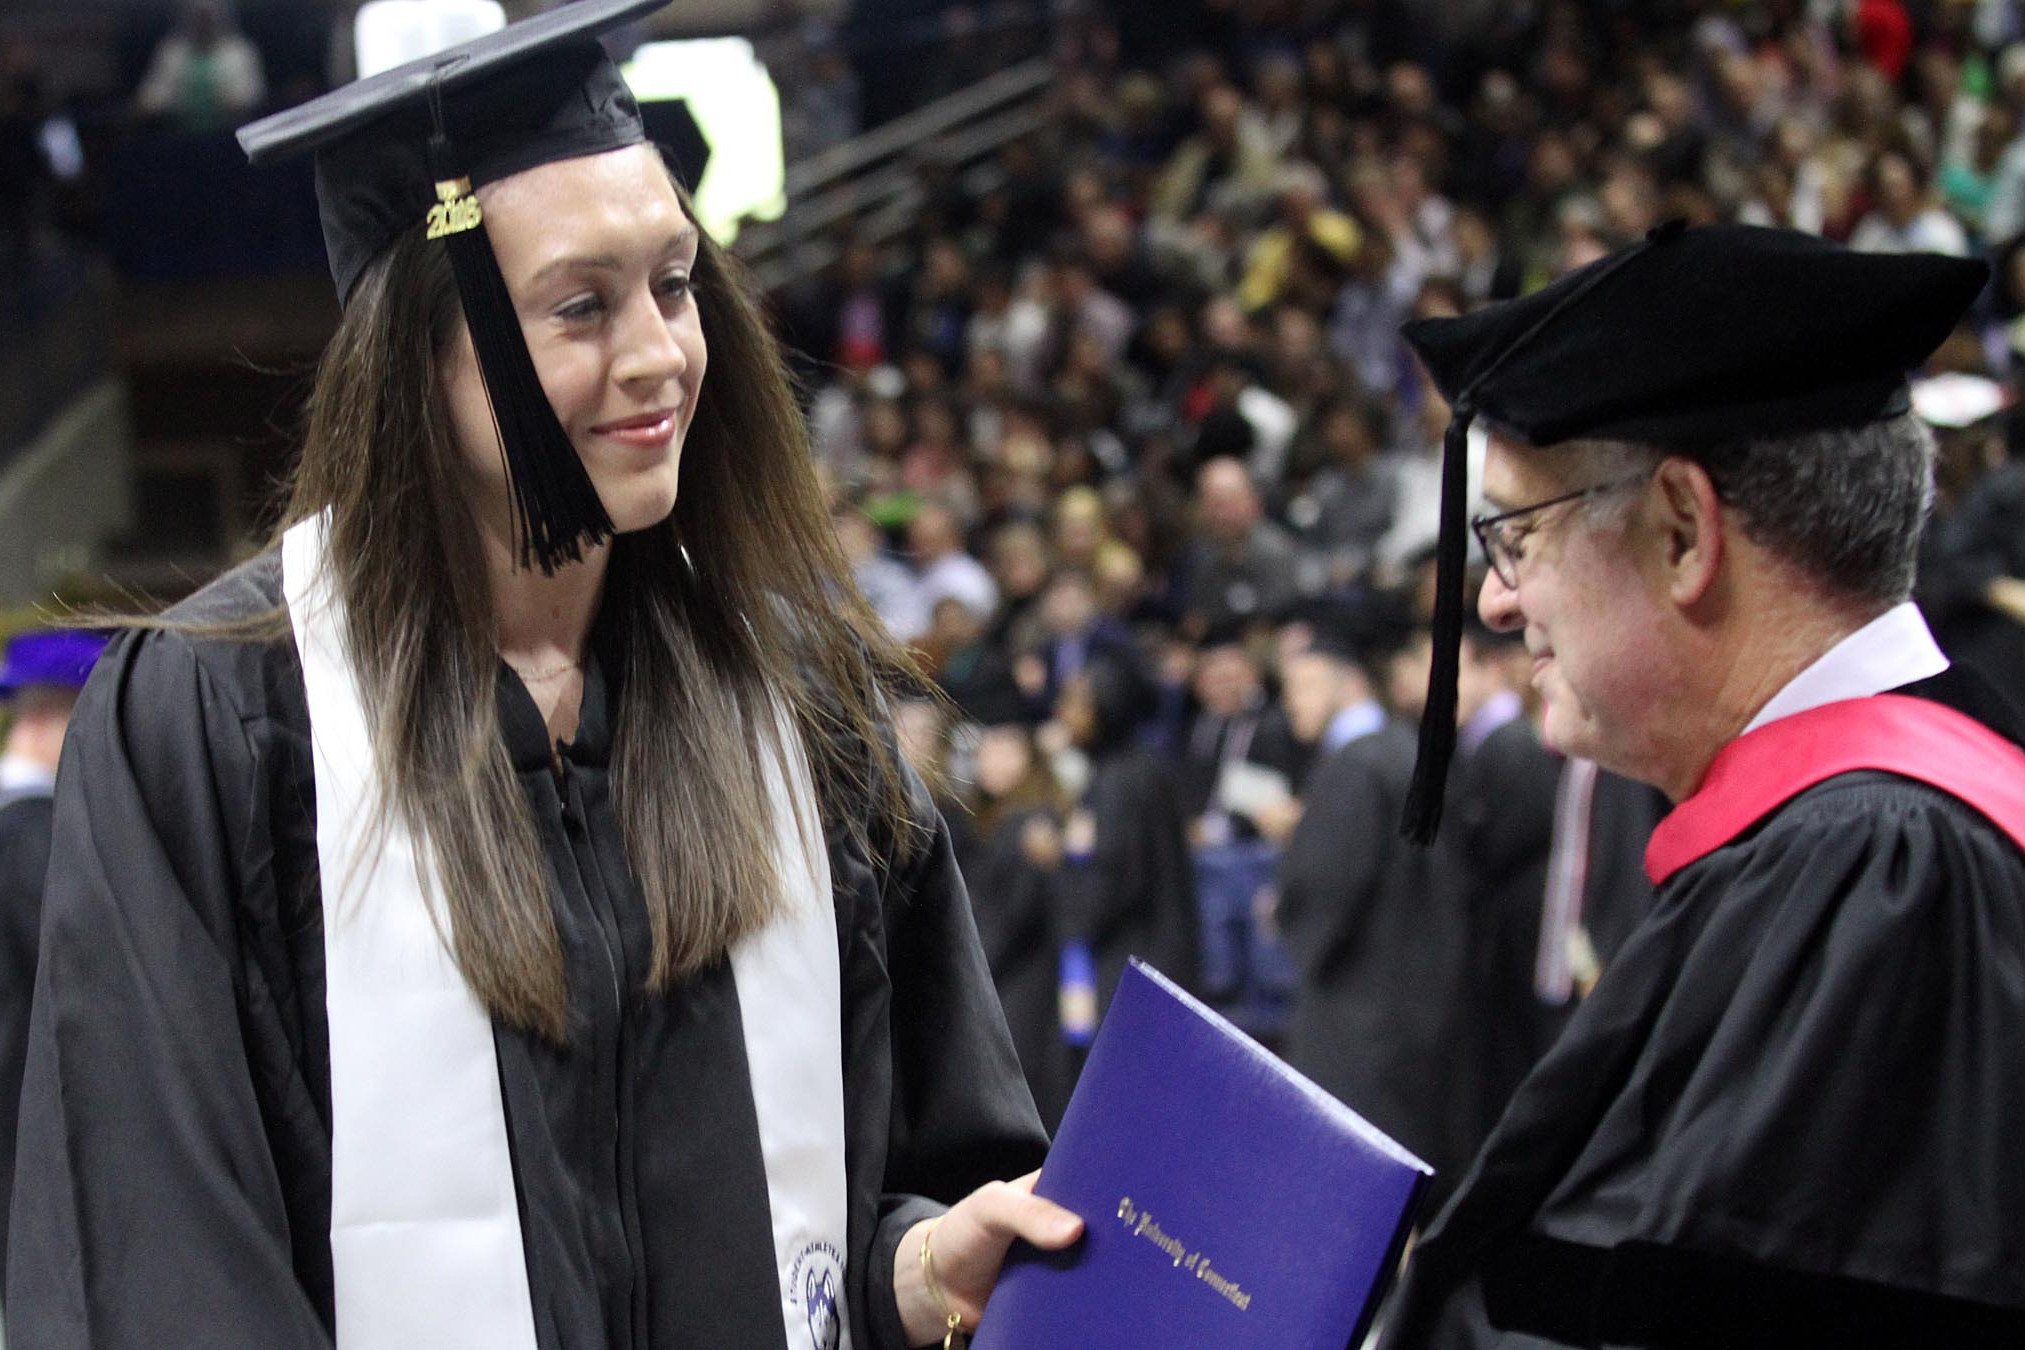 Breanna Stewart '16 (CLAS) receives her diploma during Commencement this past May. (Bob Stowell for UConn)